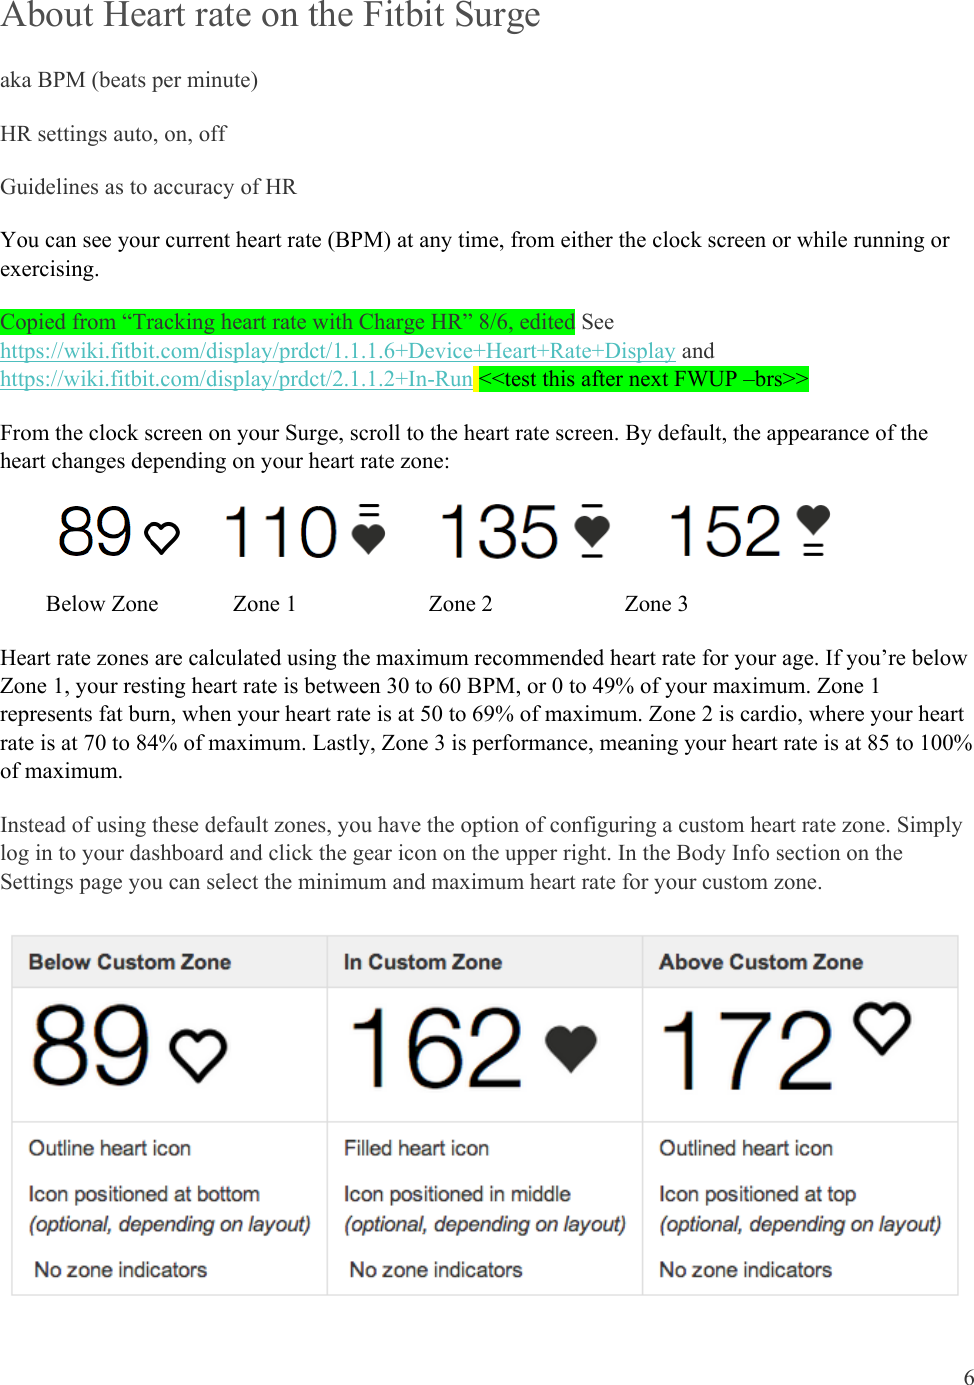 6  About Heart rate on the Fitbit Surge aka BPM (beats per minute) HR settings auto, on, off Guidelines as to accuracy of HR You can see your current heart rate (BPM) at any time, from either the clock screen or while running or exercising.  Copied from “Tracking heart rate with Charge HR” 8/6, edited See https://wiki.fitbit.com/display/prdct/1.1.1.6+Device+Heart+Rate+Display and https://wiki.fitbit.com/display/prdct/2.1.1.2+In-Run &lt;&lt;test this after next FWUP –brs&gt;&gt; From the clock screen on your Surge, scroll to the heart rate screen. By default, the appearance of the heart changes depending on your heart rate zone:                                                 Below Zone             Zone 1                       Zone 2                       Zone 3 Heart rate zones are calculated using the maximum recommended heart rate for your age. If you’re below Zone 1, your resting heart rate is between 30 to 60 BPM, or 0 to 49% of your maximum. Zone 1 represents fat burn, when your heart rate is at 50 to 69% of maximum. Zone 2 is cardio, where your heart rate is at 70 to 84% of maximum. Lastly, Zone 3 is performance, meaning your heart rate is at 85 to 100% of maximum.  Instead of using these default zones, you have the option of configuring a custom heart rate zone. Simply log in to your dashboard and click the gear icon on the upper right. In the Body Info section on the Settings page you can select the minimum and maximum heart rate for your custom zone.   